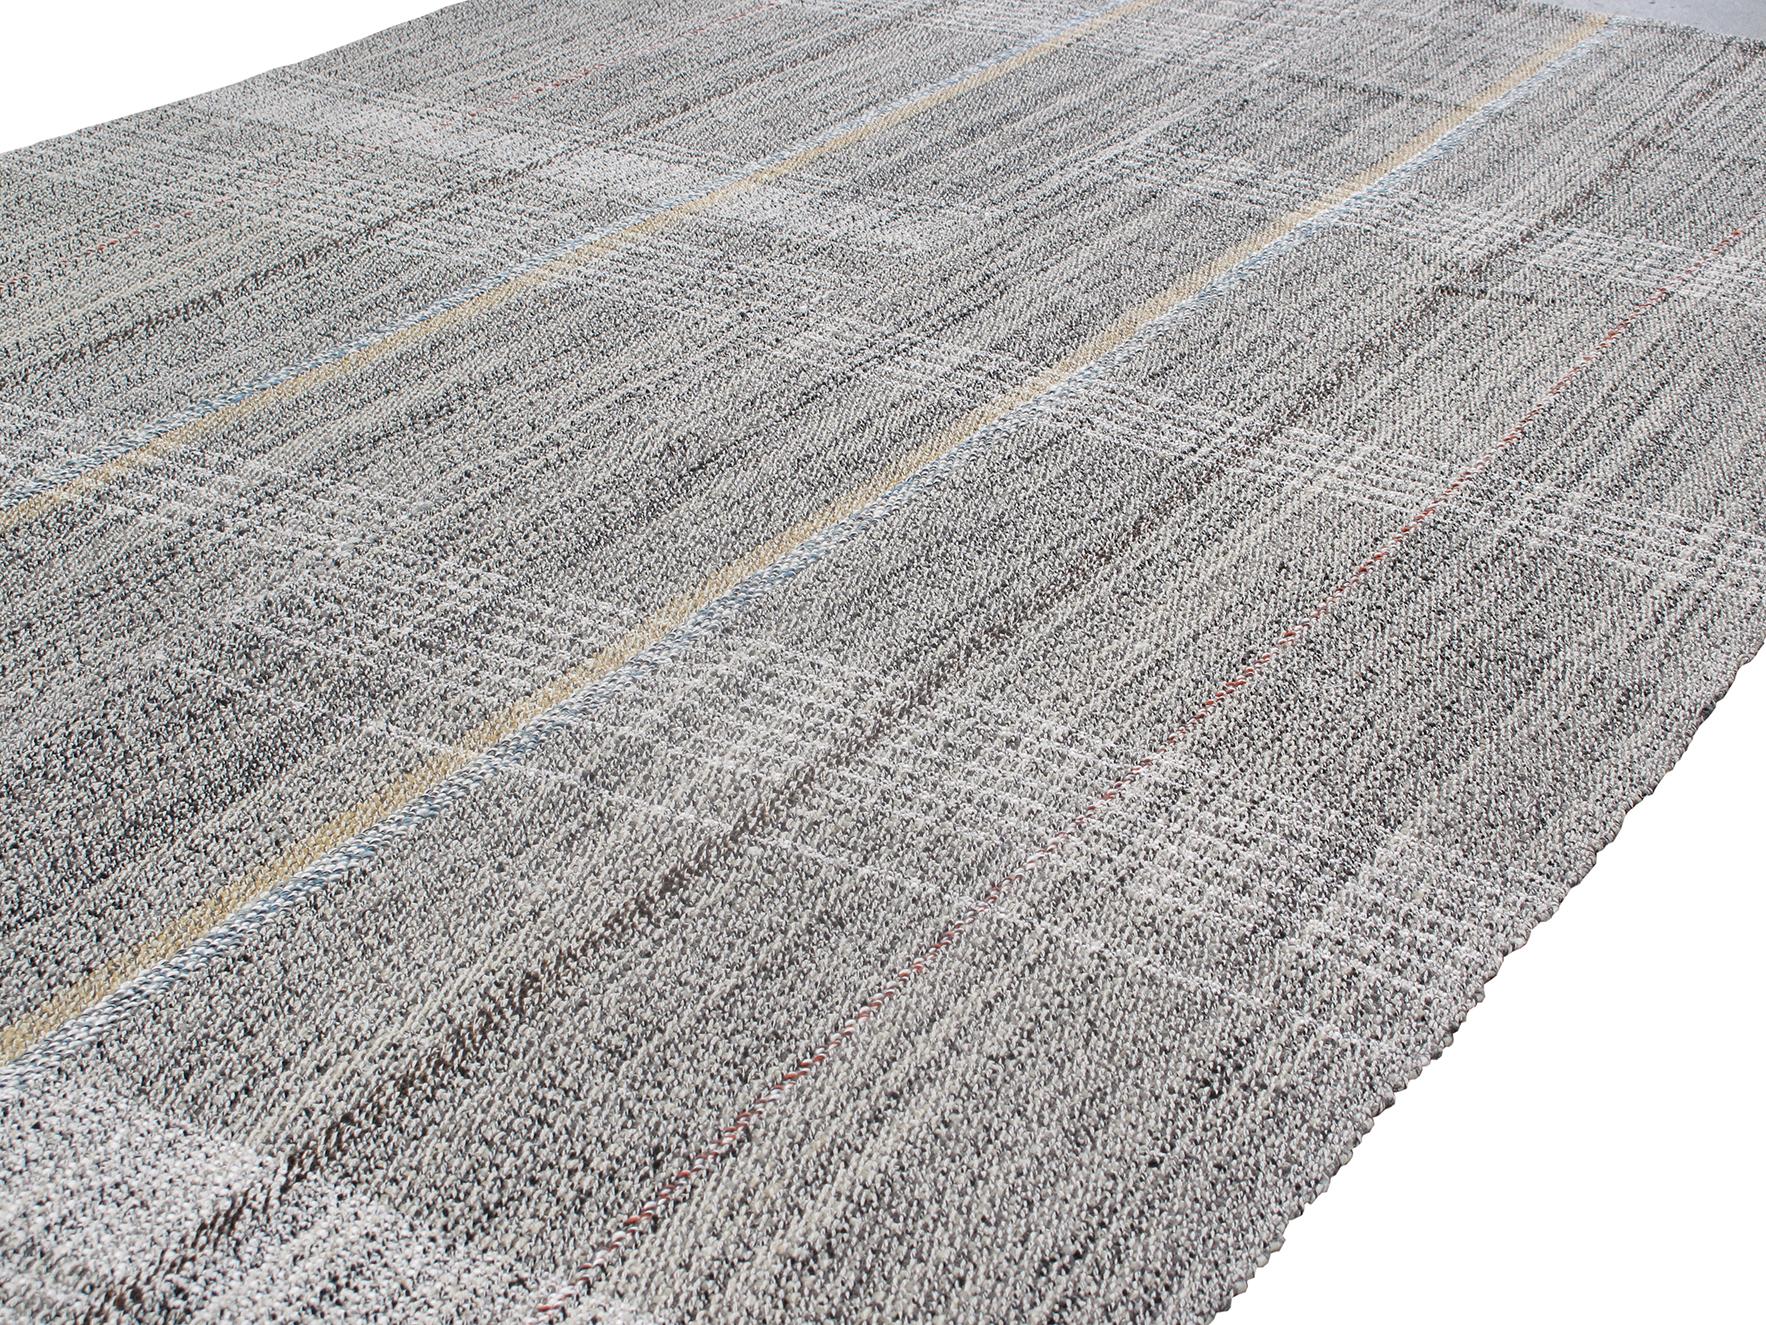 This Pelas flatweave rug is made with handspun wool with a touch of cotton and natural dyes. It is inspired by the Antique kilims that are native to the Kurdish region in Iran. NASIRI continues their rich tradition of rug making by applying the same